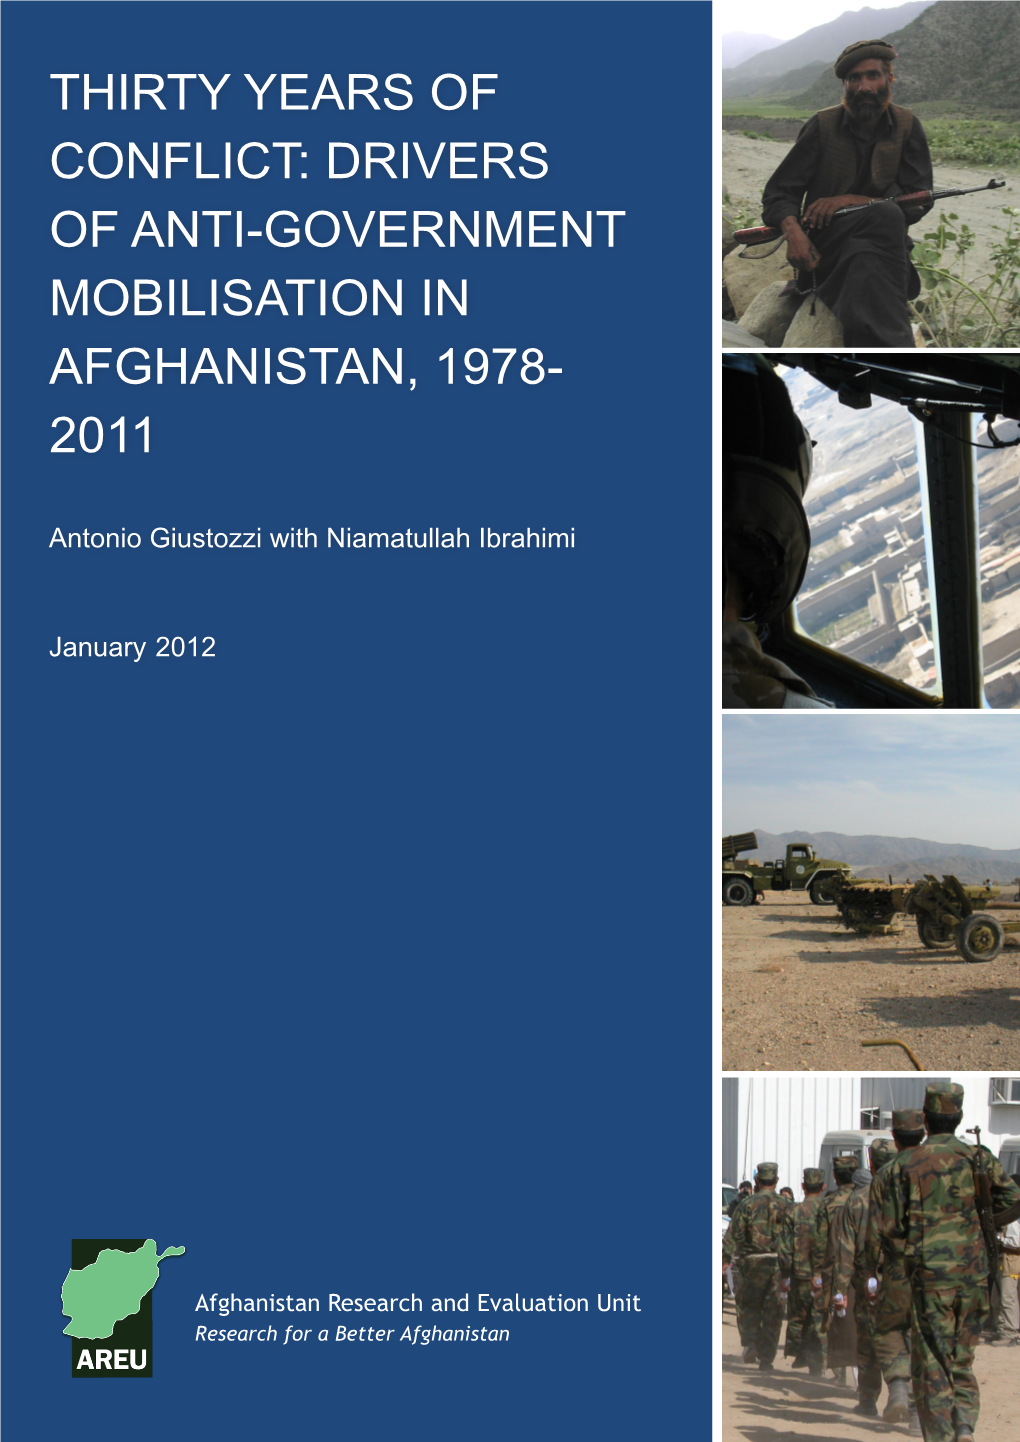 Drivers of Anti-Government Mobilisation in Afghanistan, 1978-2011